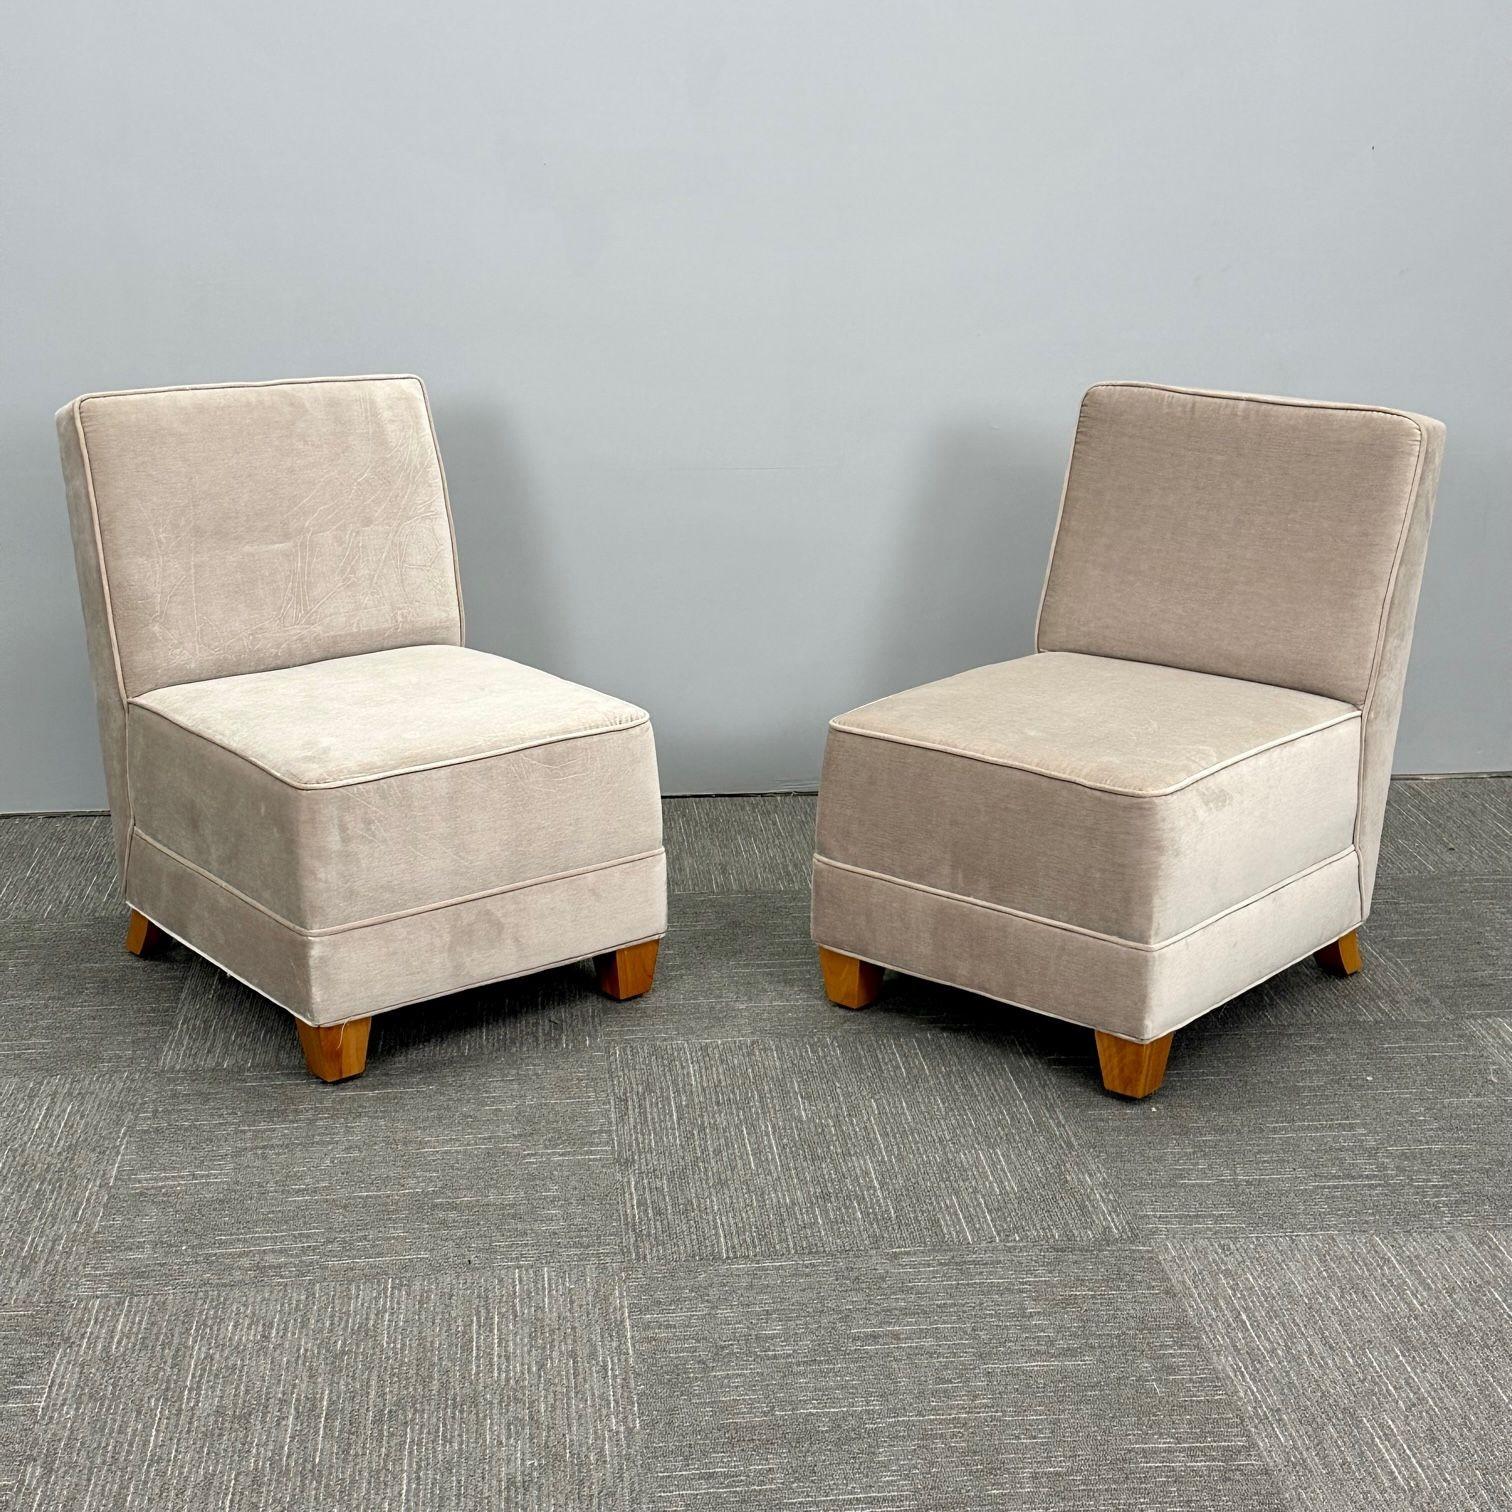 Pair Mid-Century Modern Jean-Michel Frank Style Lounge / Slipper Chairs, Mohair In New Condition For Sale In Stamford, CT